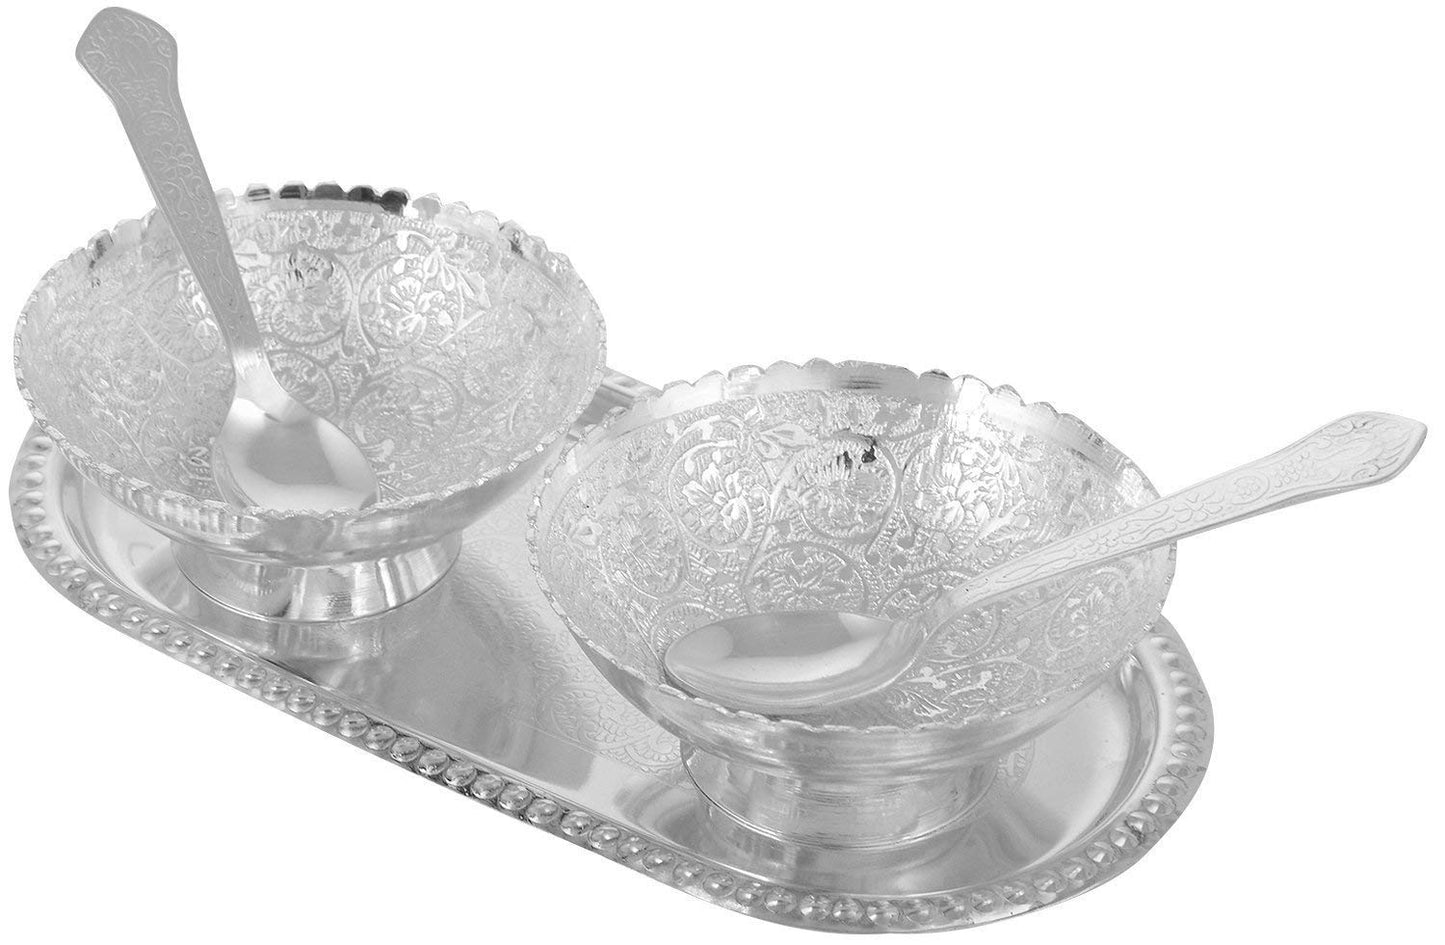 Rudra Exports Silver Plated Brass Bowl Set of 5 Pcs with Box Packing